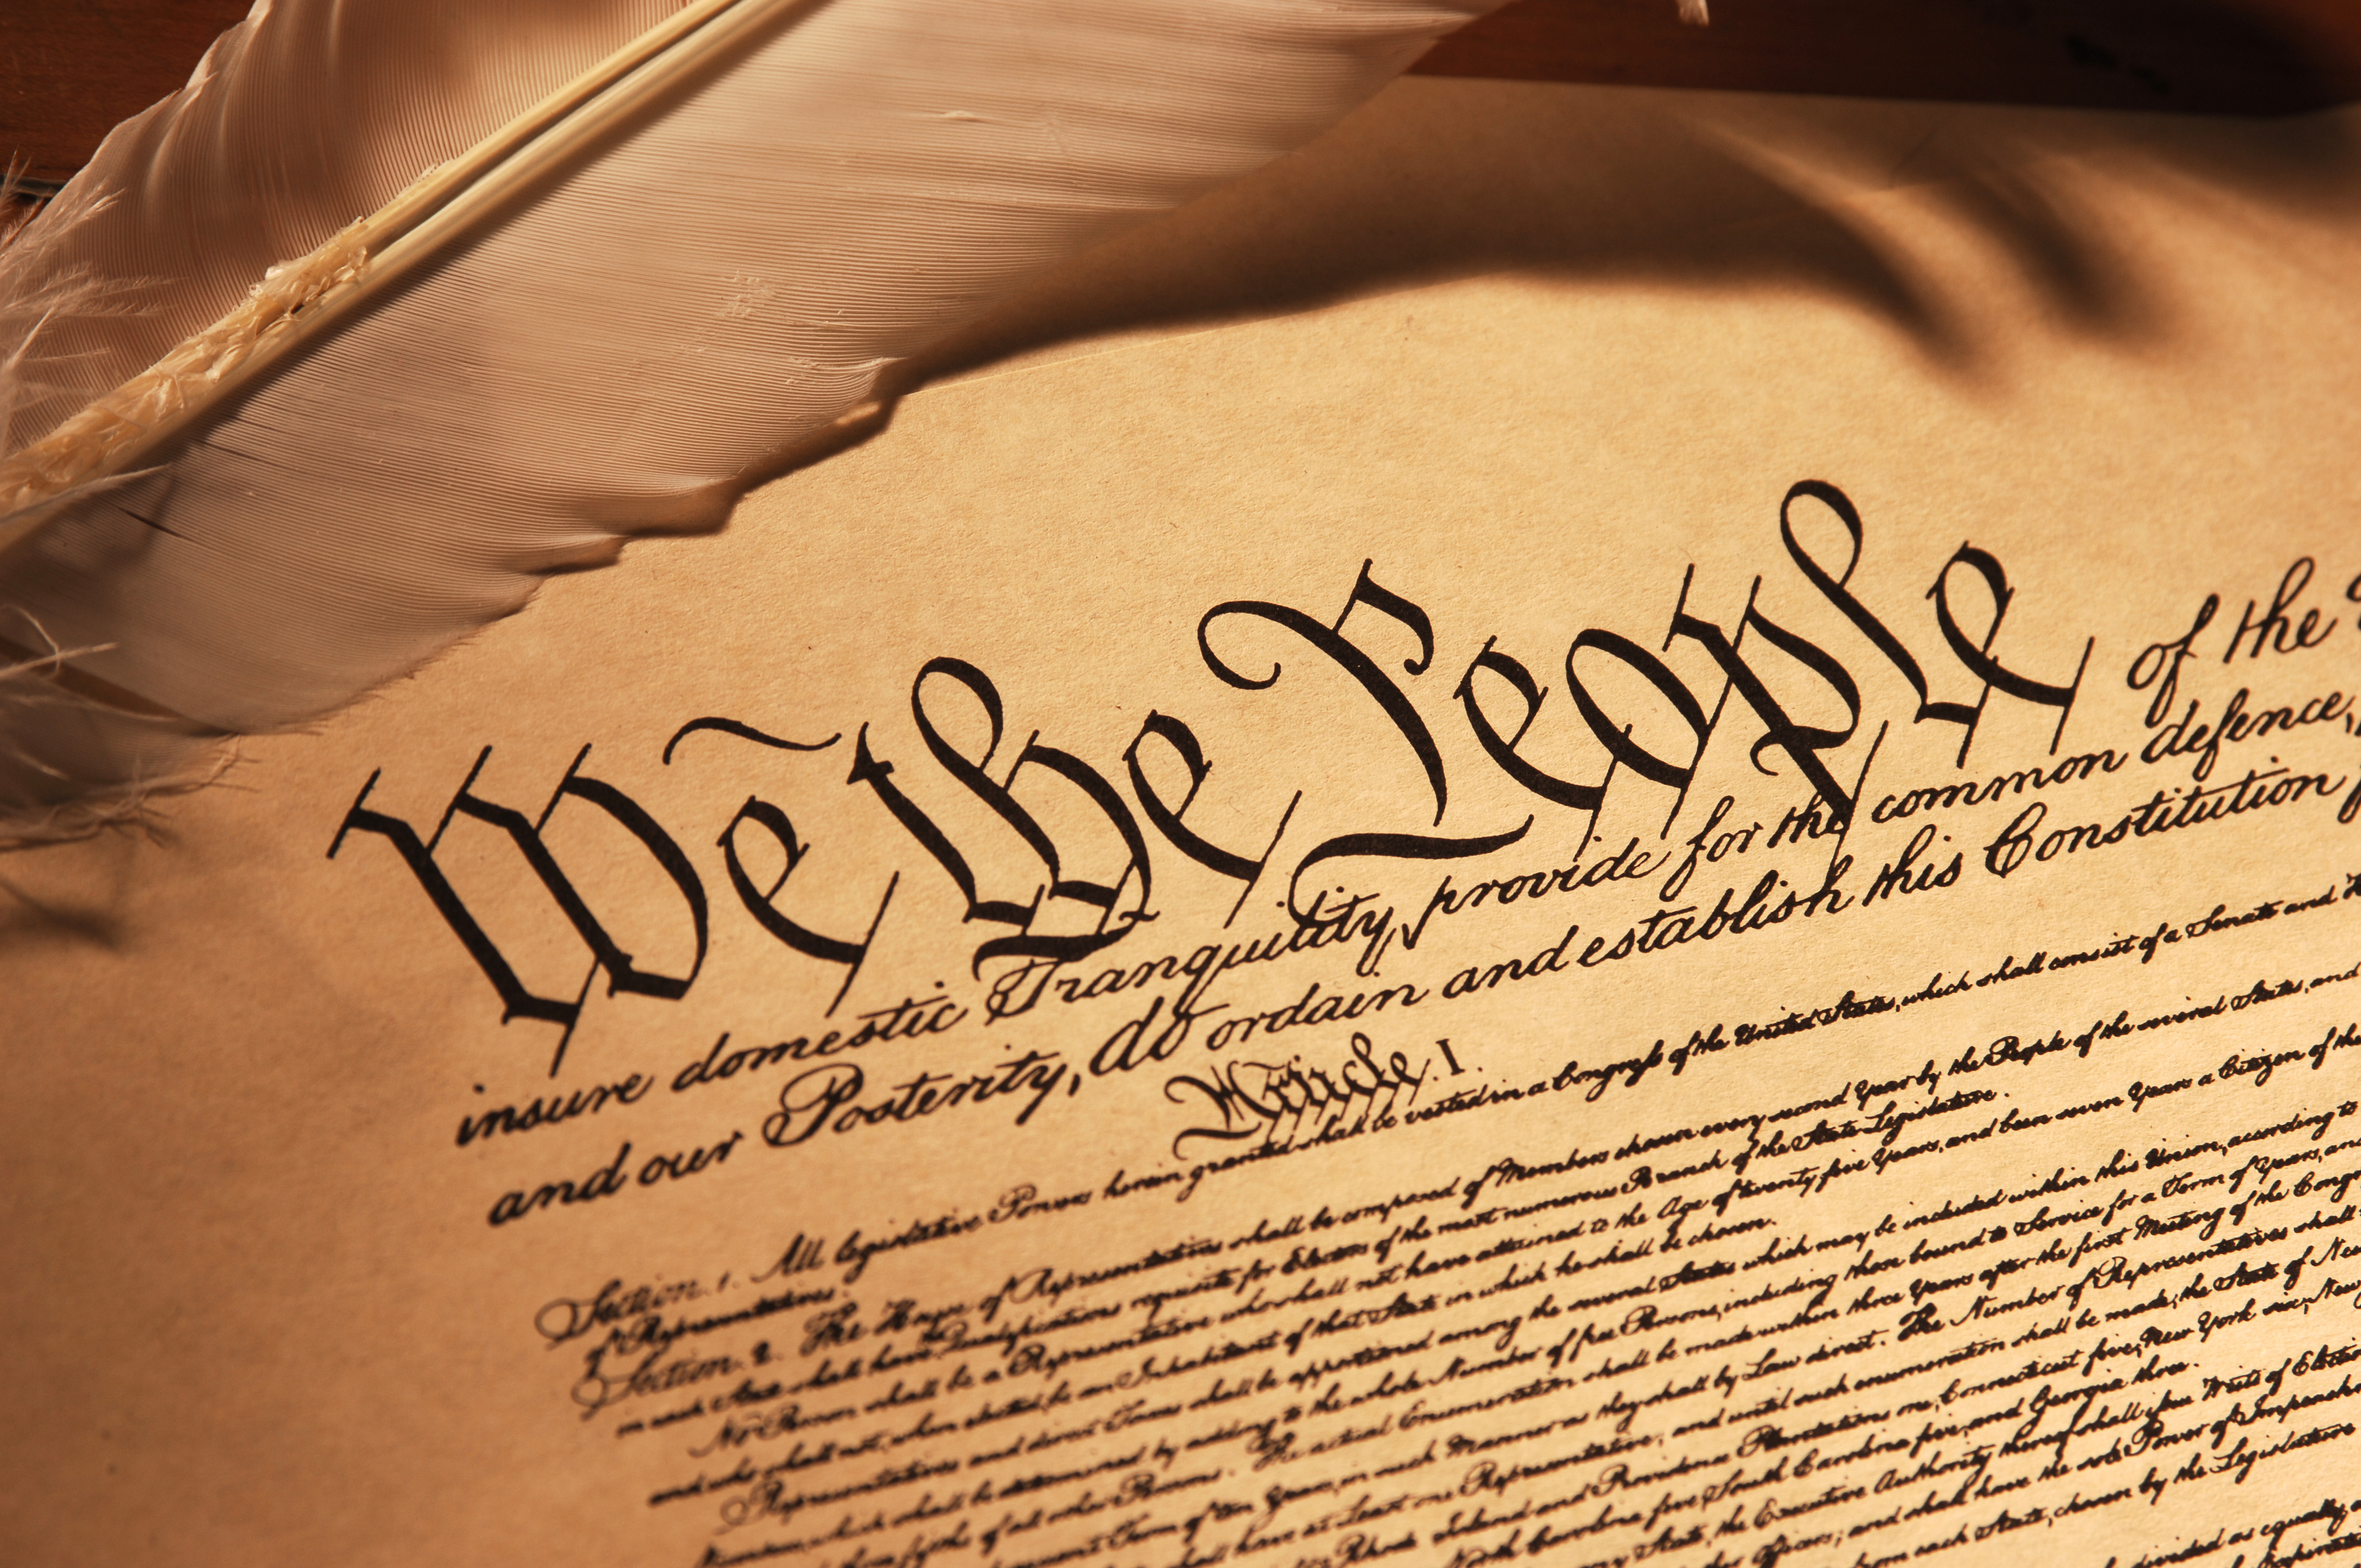 Current Constitutional Issues – Electoral College, Military Draft and the First Amendment